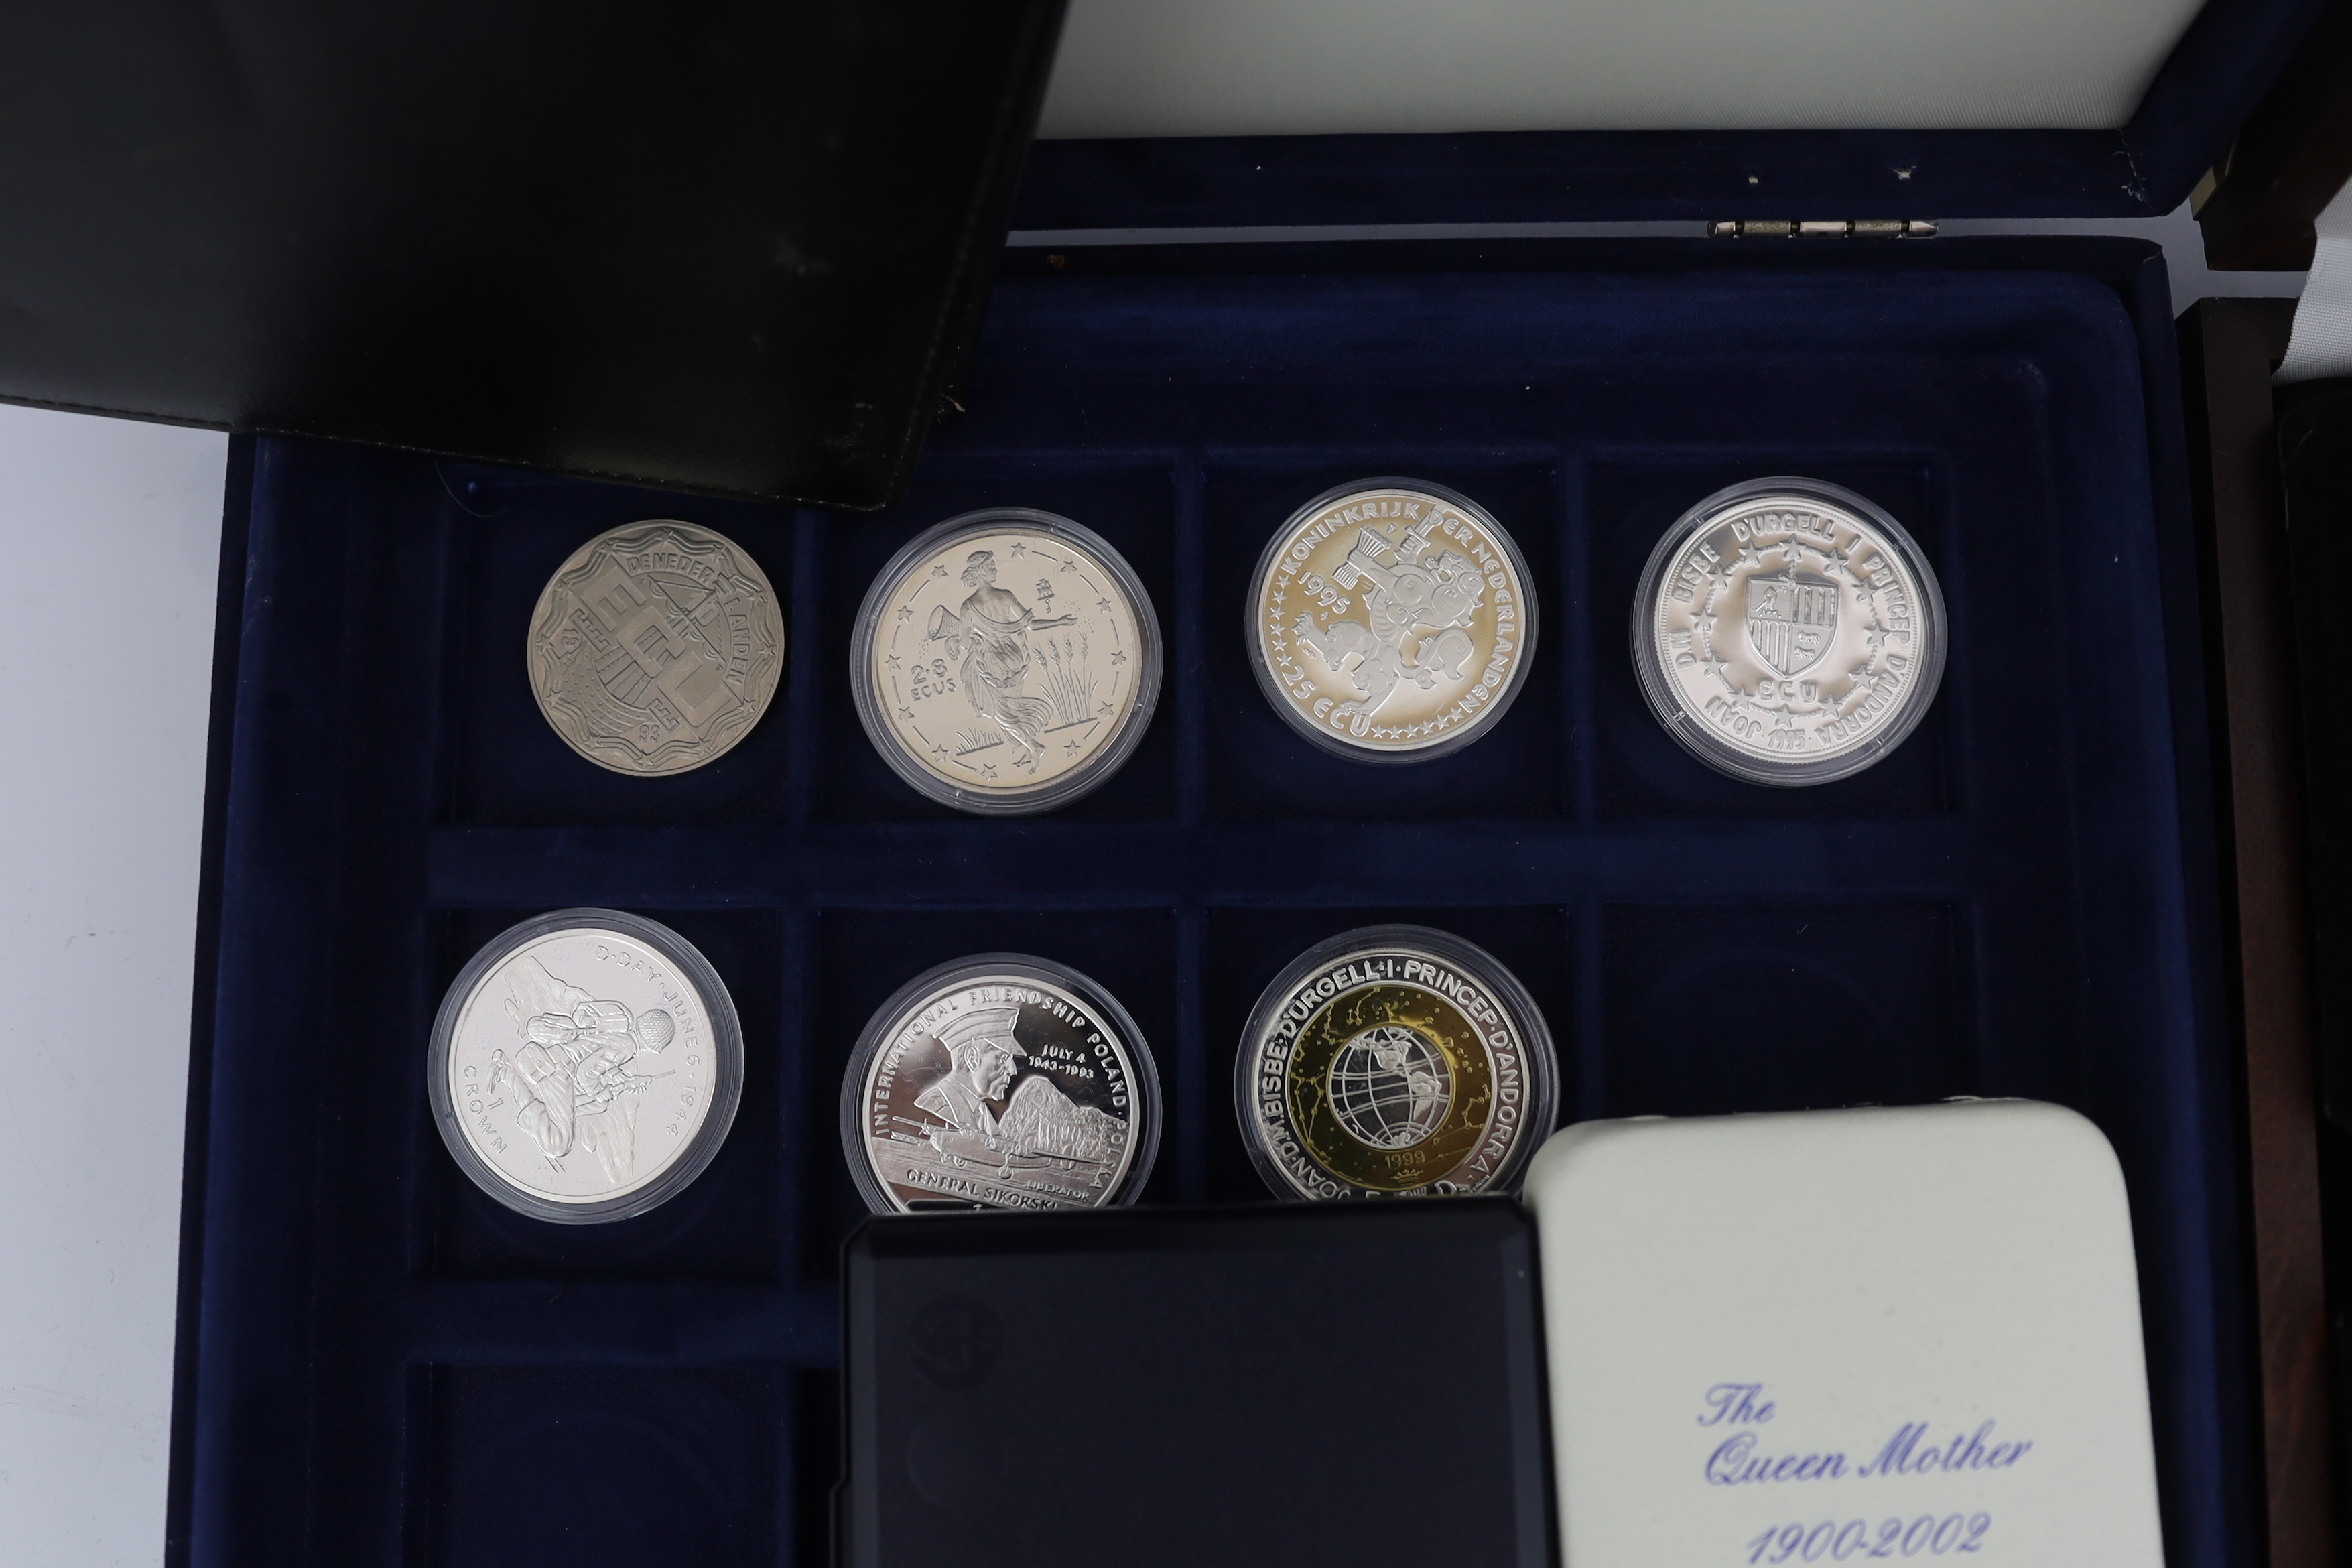 QEII proof silver coins, and ECU coins, many commemorating the Queen mother including Georgia and - Image 2 of 4